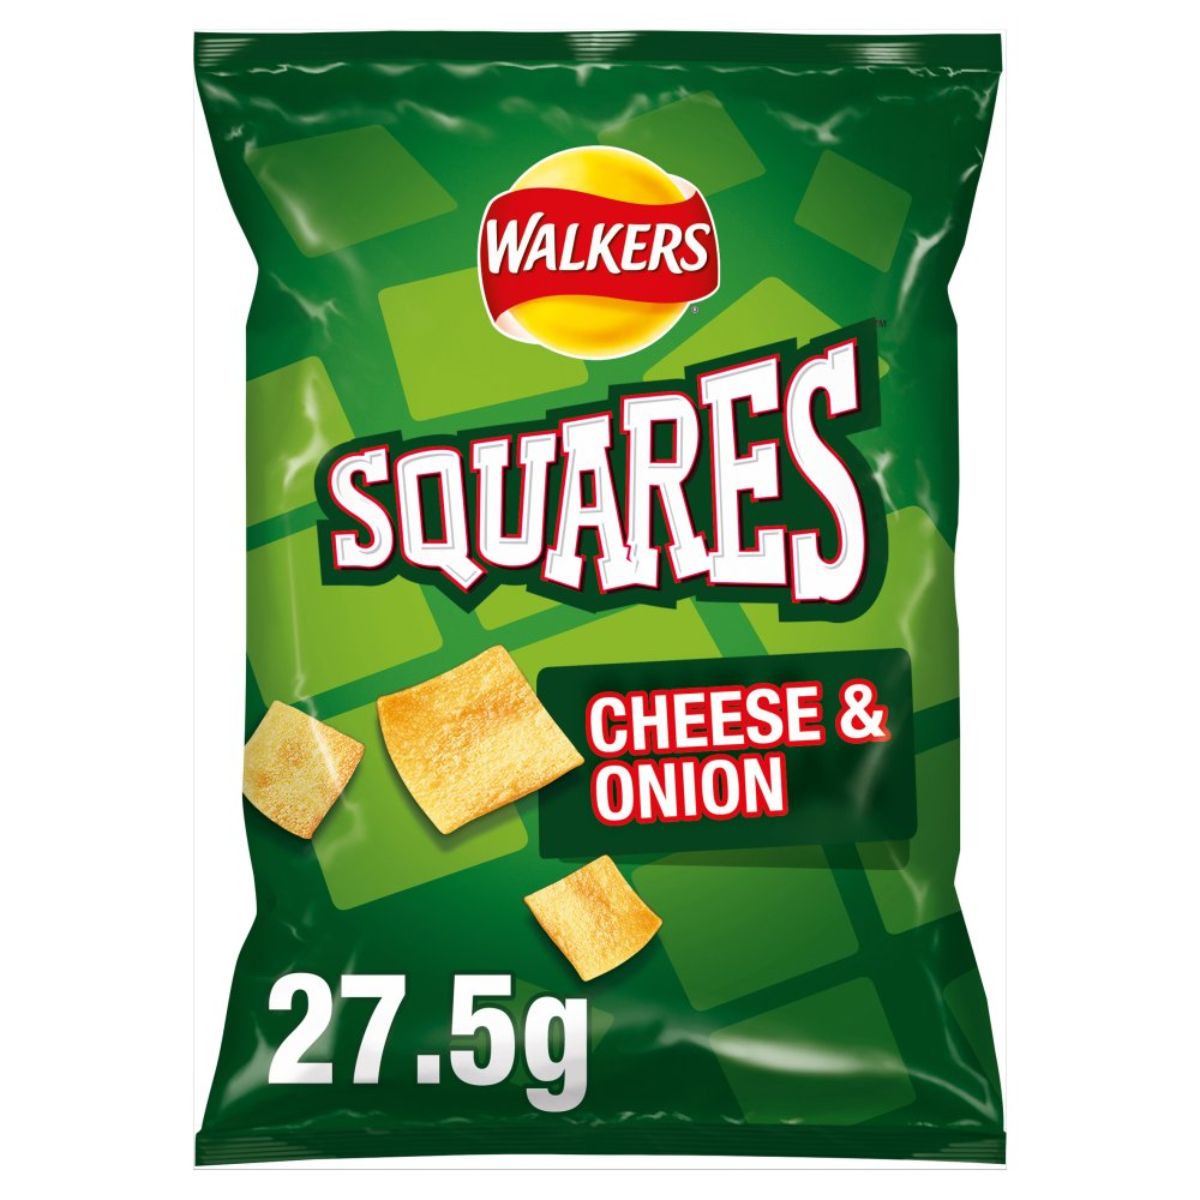 Walkers - Squares Cheese & Onion - 27.5g cheese and onion.